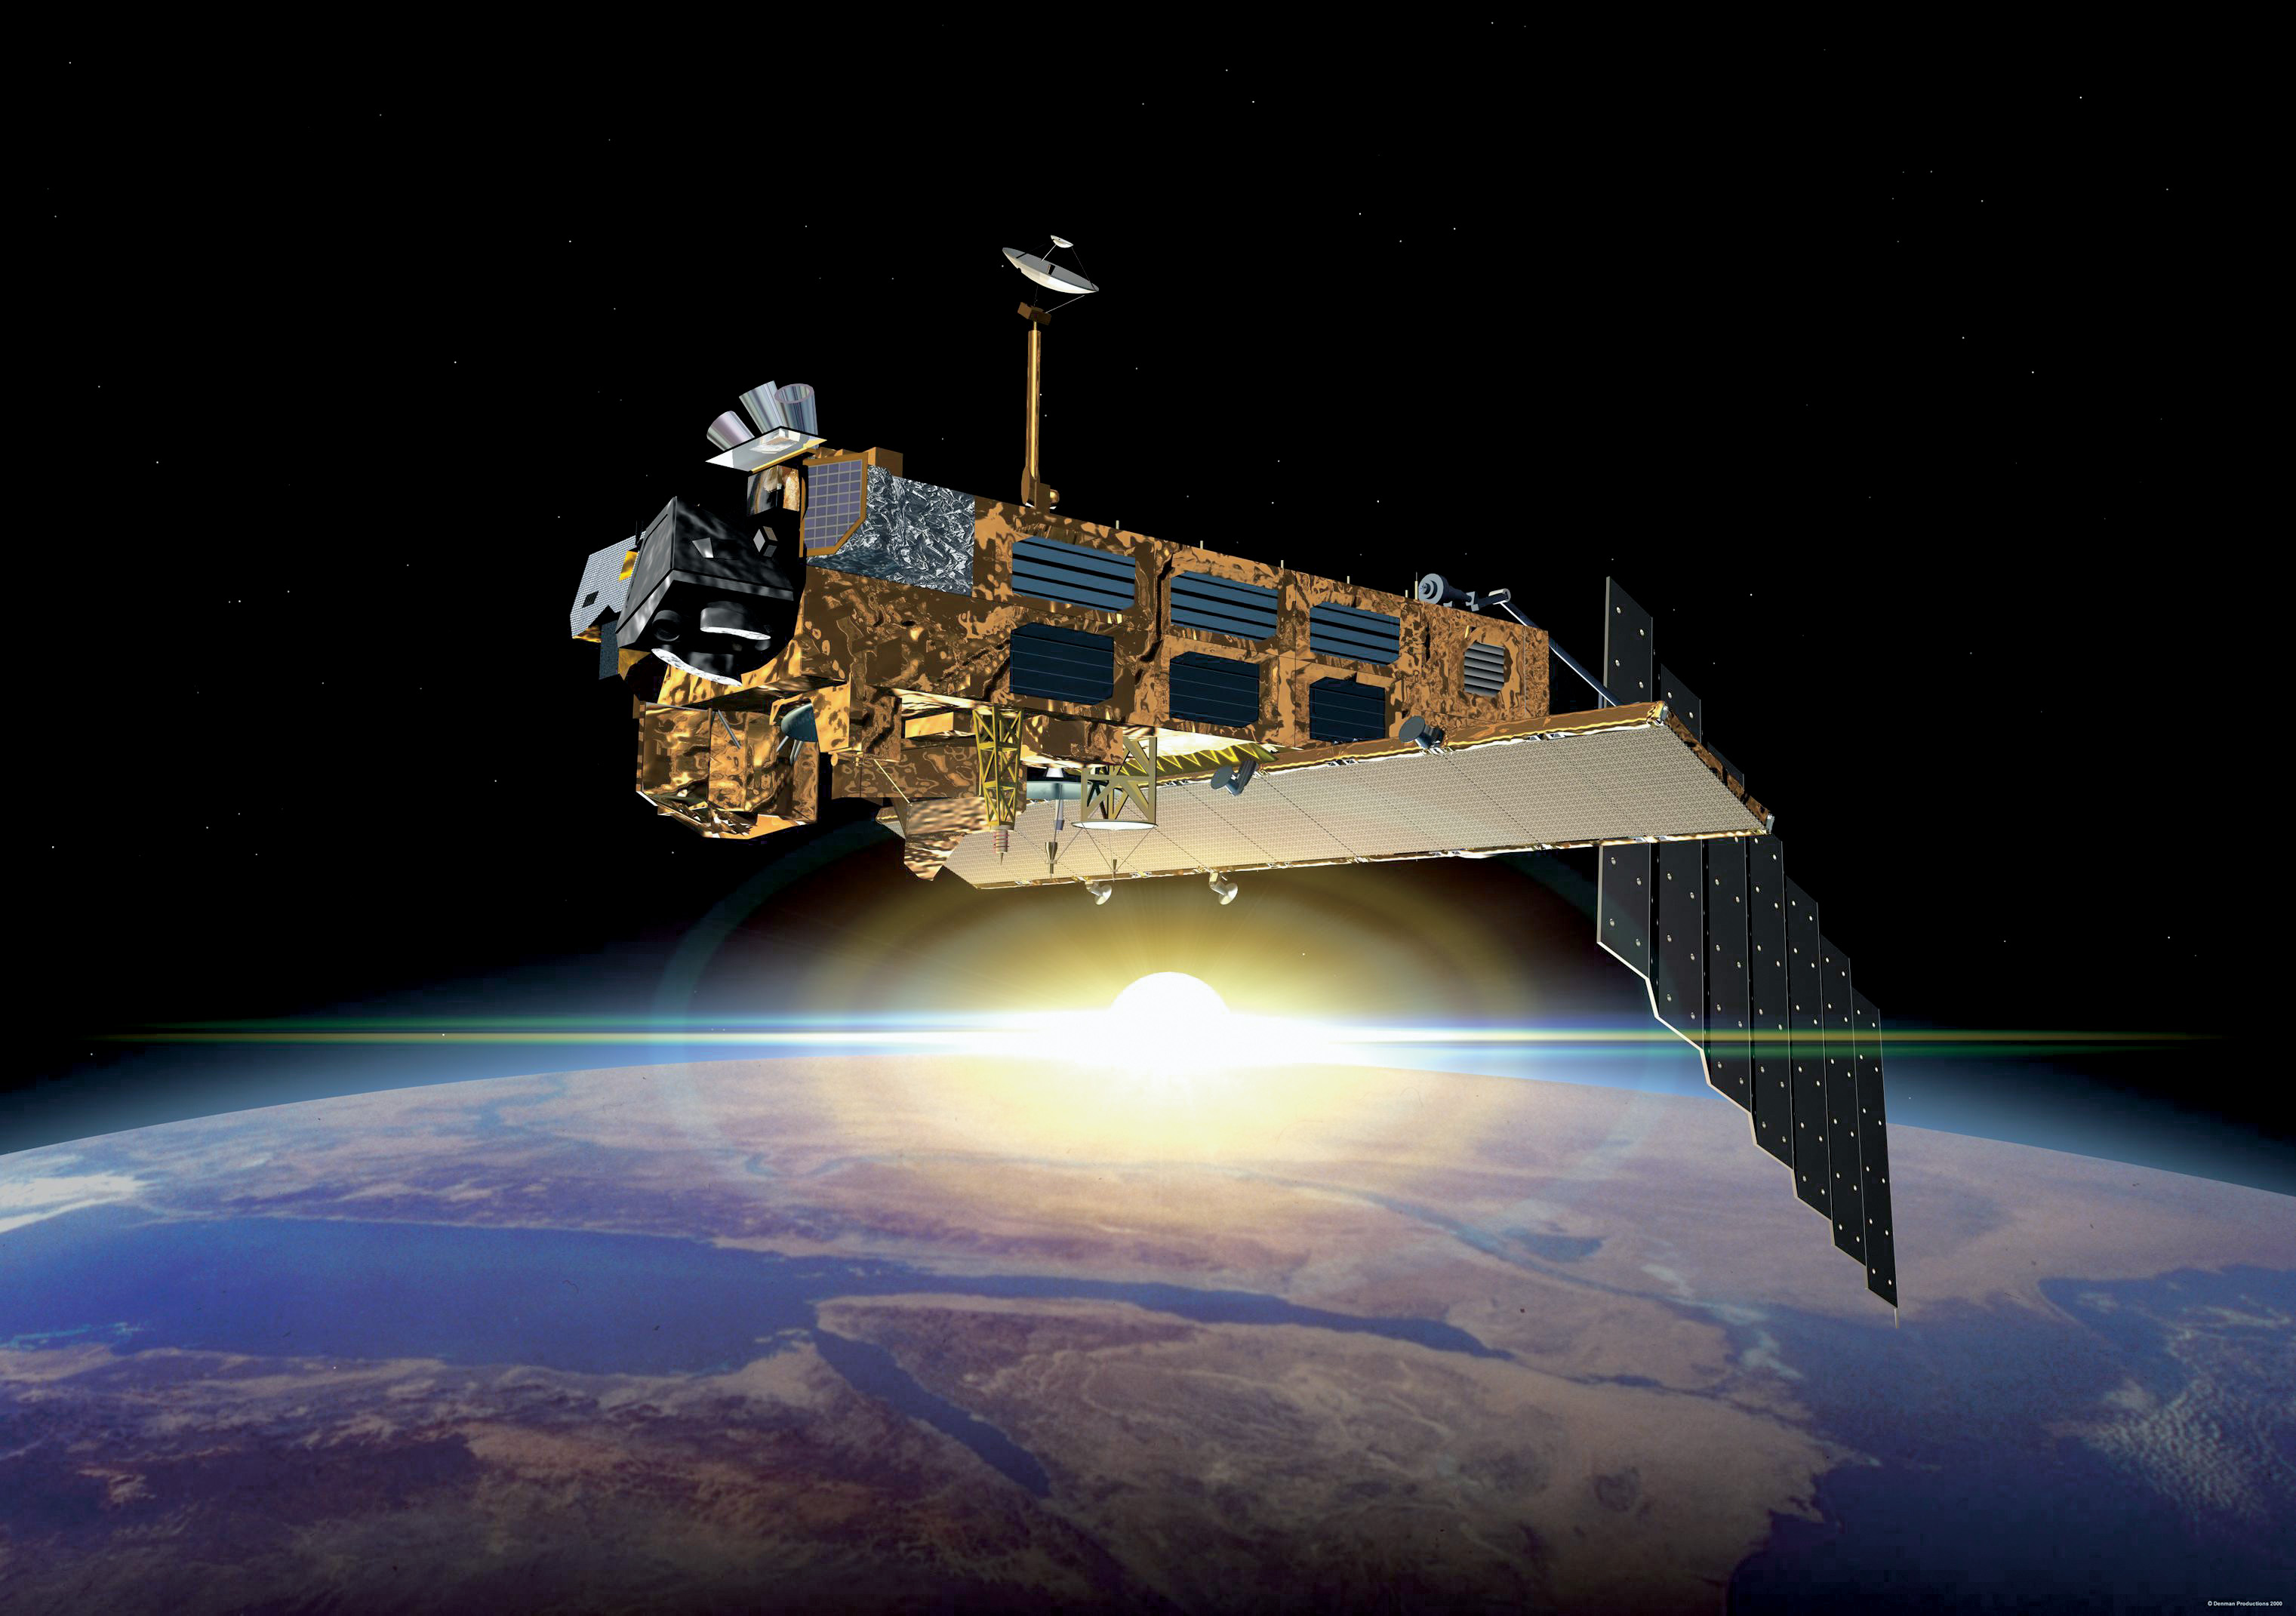 Artist's impression of the European Space Agency's huge Envisat Earth-observing satellite, which stopped communicating with Earth in April 2012.